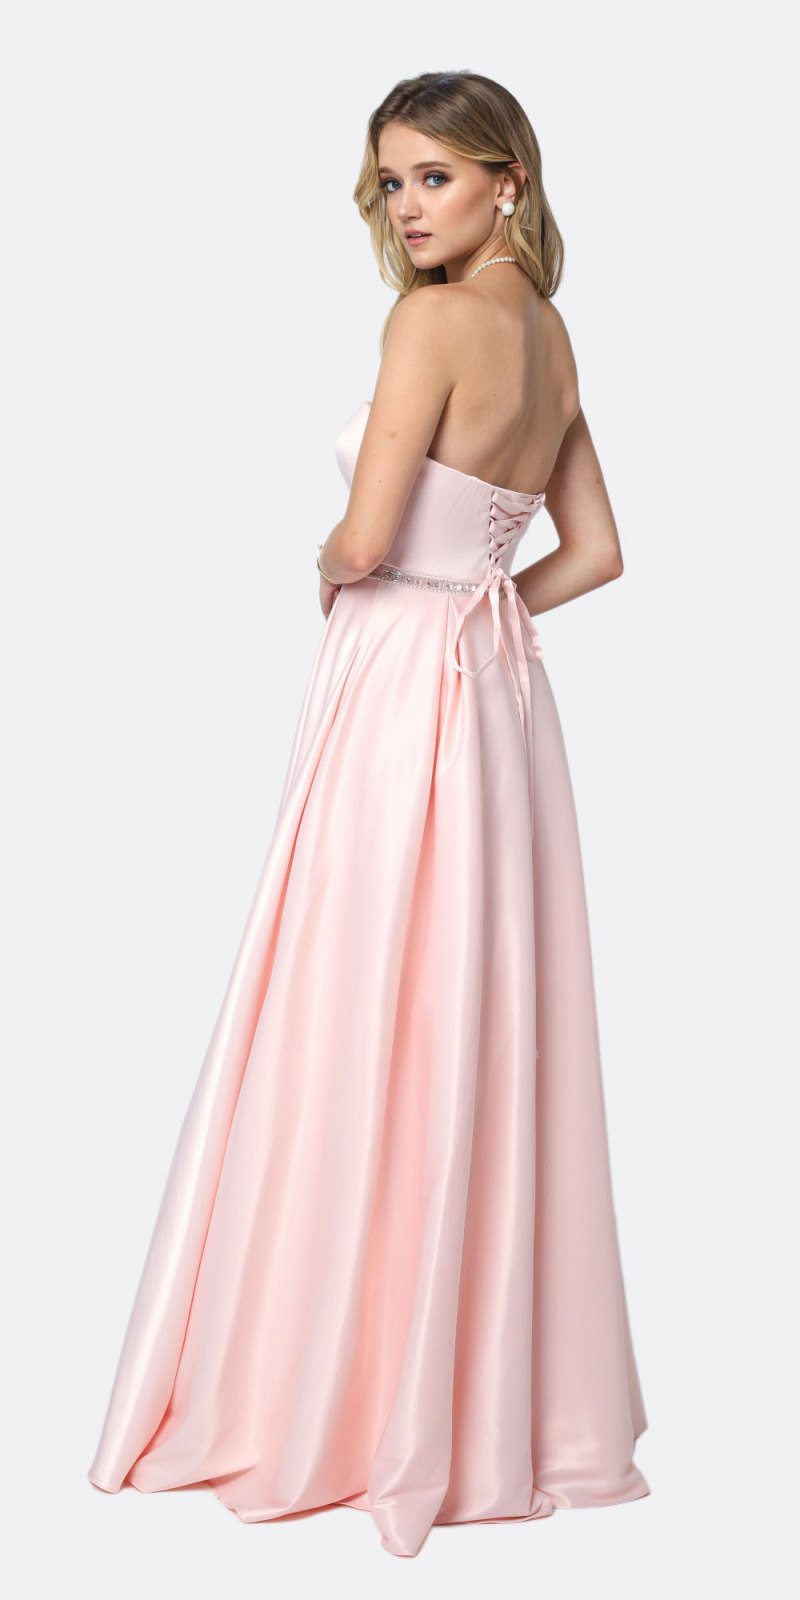 Juliet 687 Shiny Satin A Line Gown Blush With Beaded Belt And Pockets